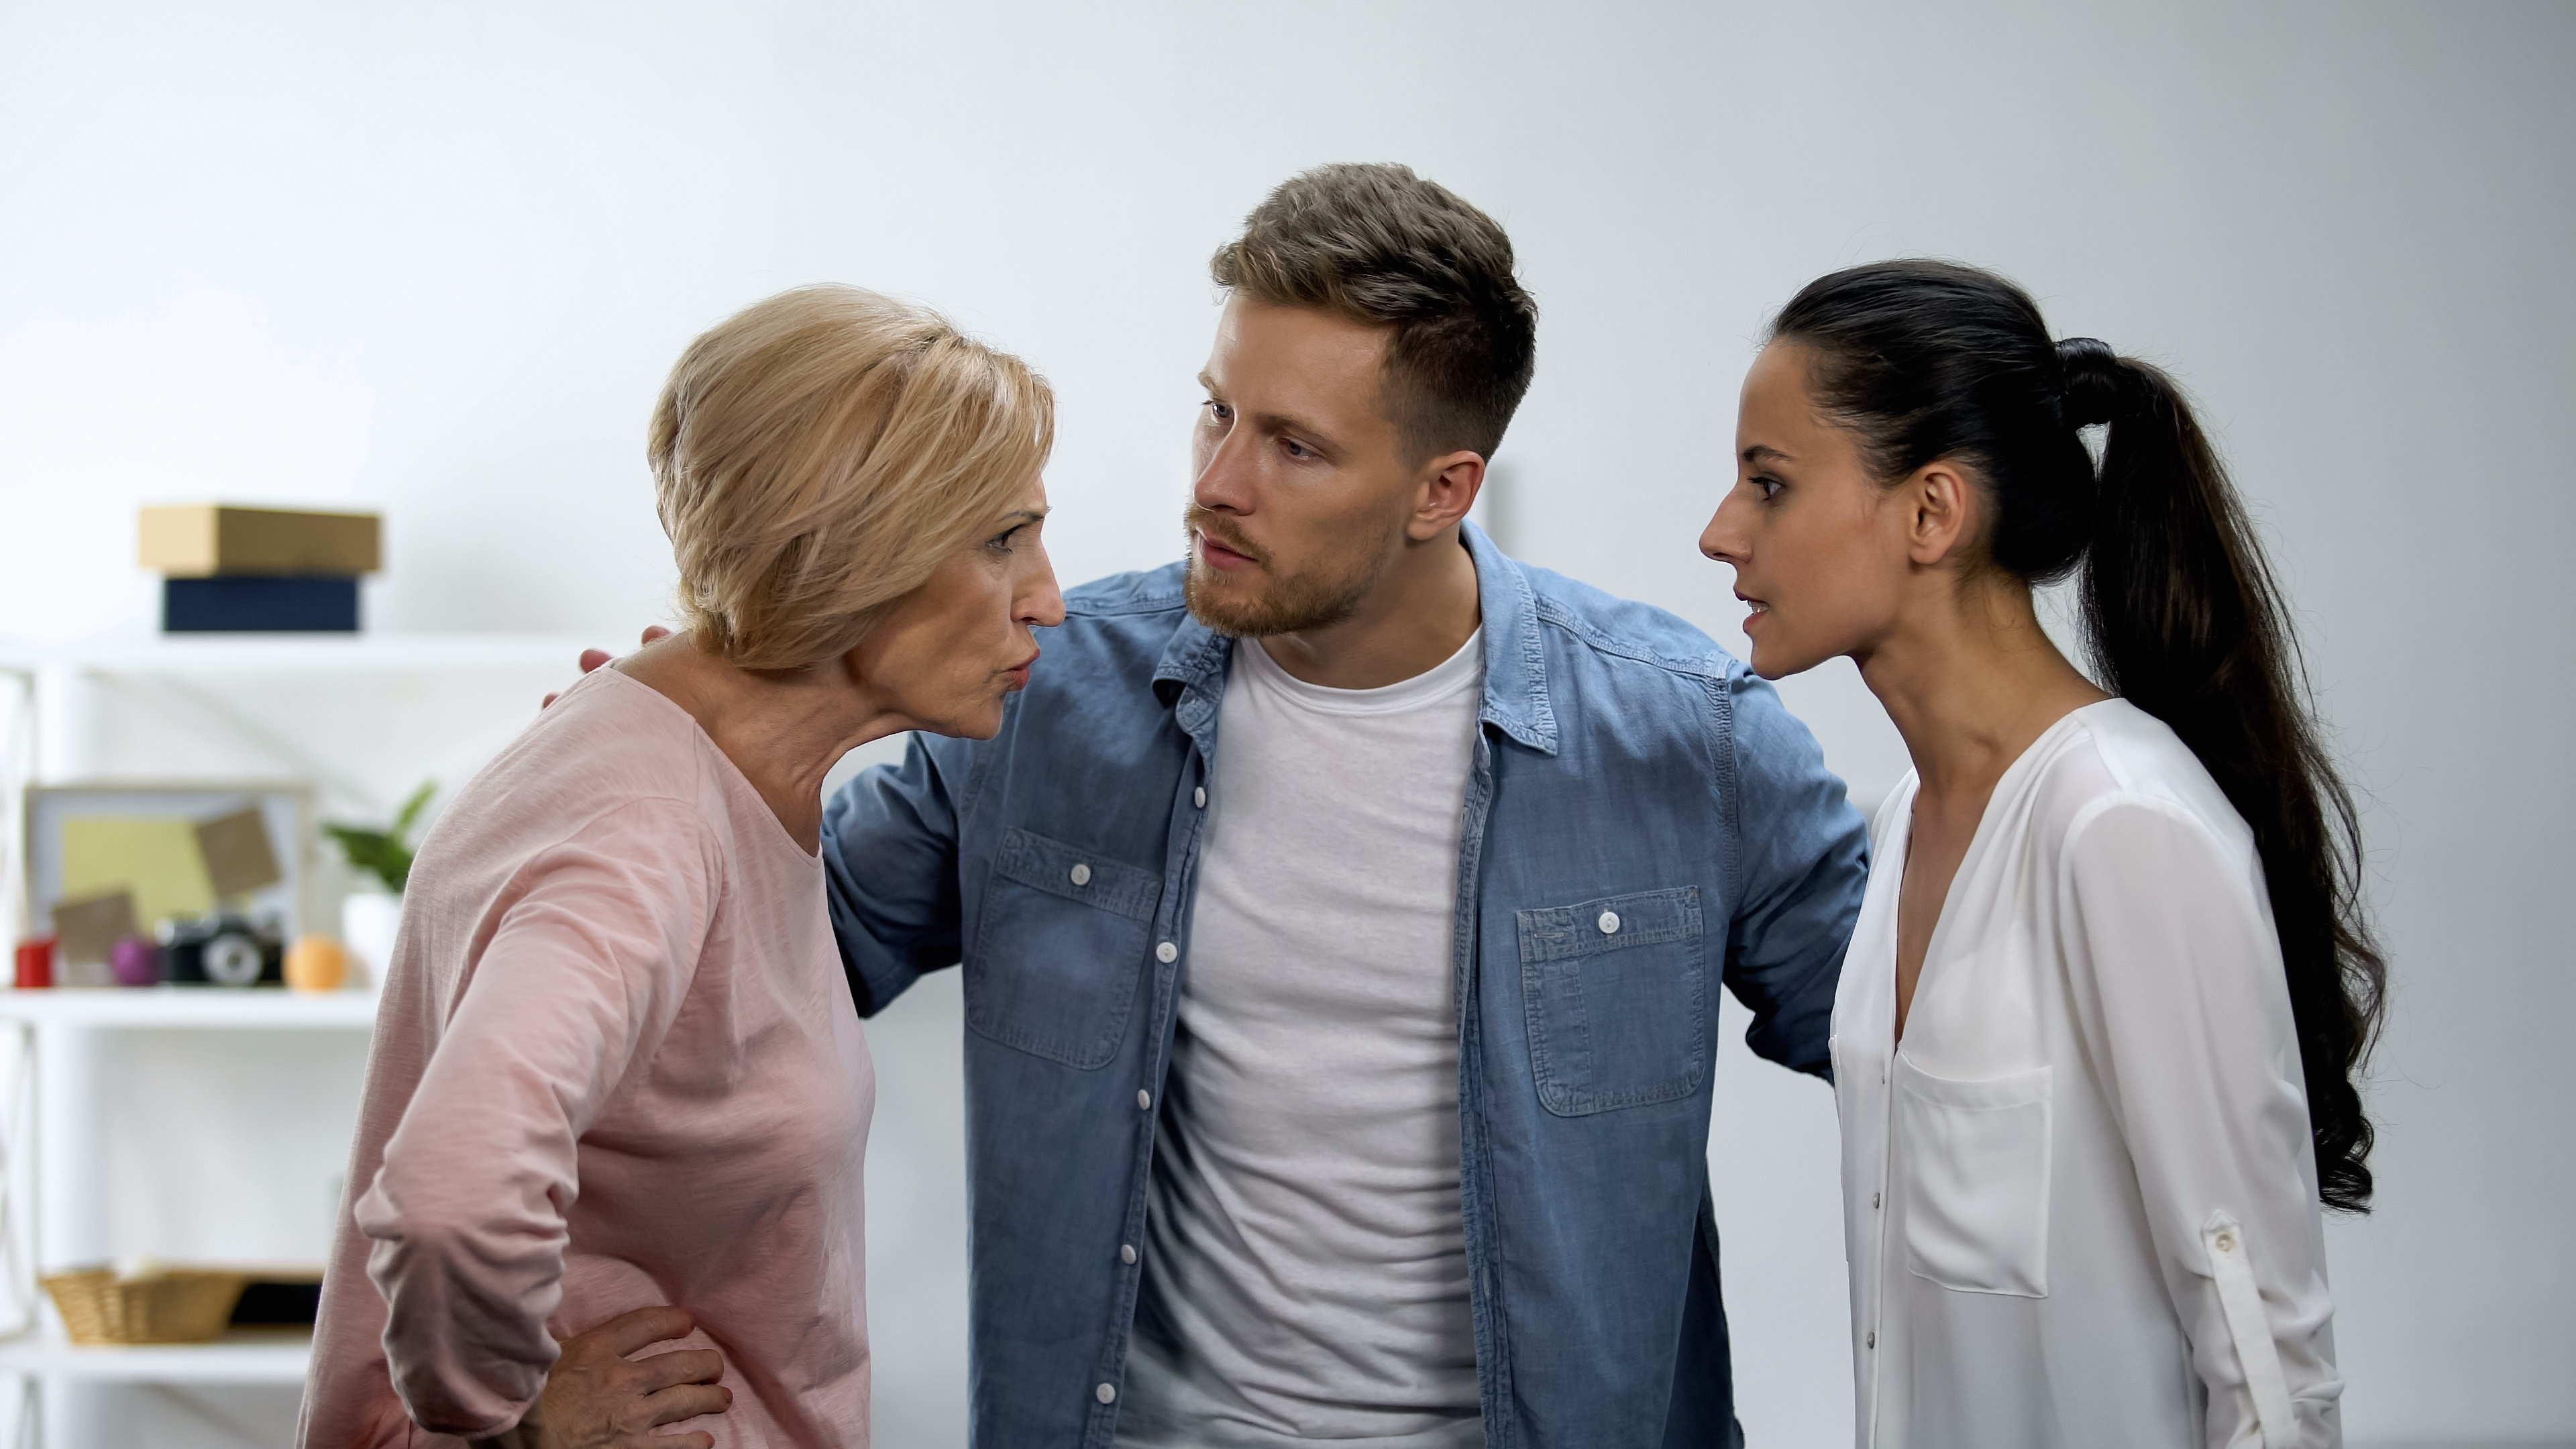 A man mediating an argument between an older woman and a younger woman | Source: Shutterstock